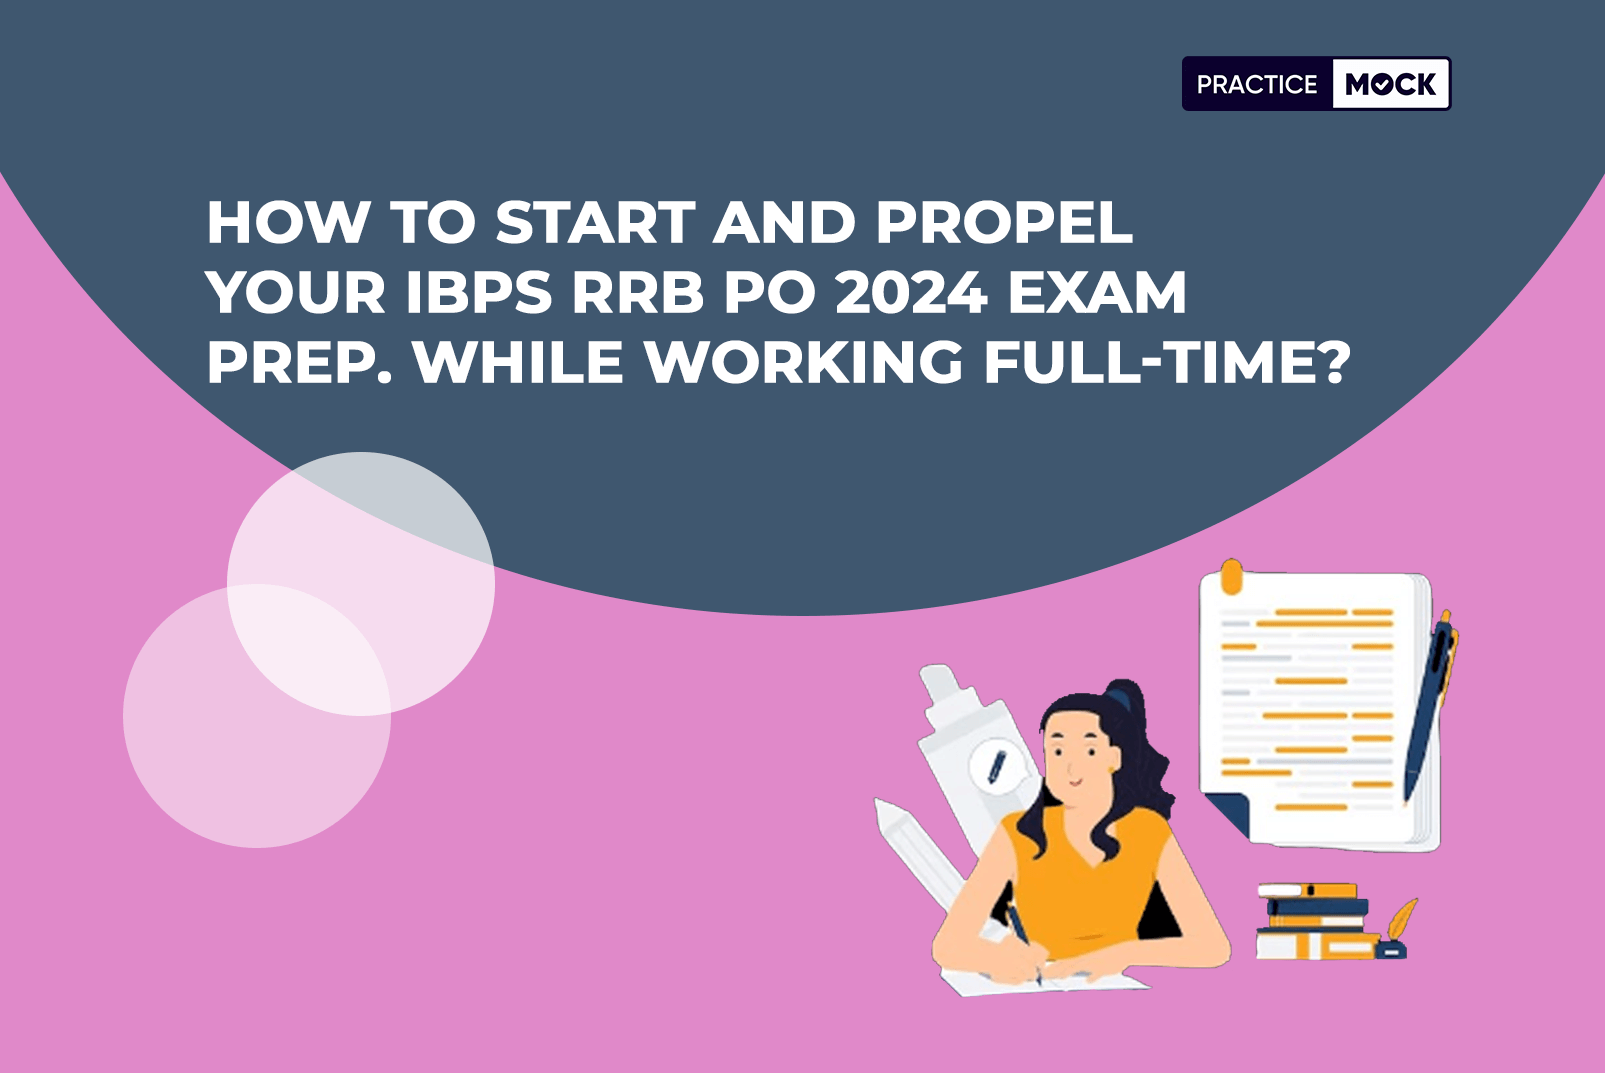 How to Start and Propel Your IBPS RRB PO 2024 Exam Prep. While Working Full-Time?